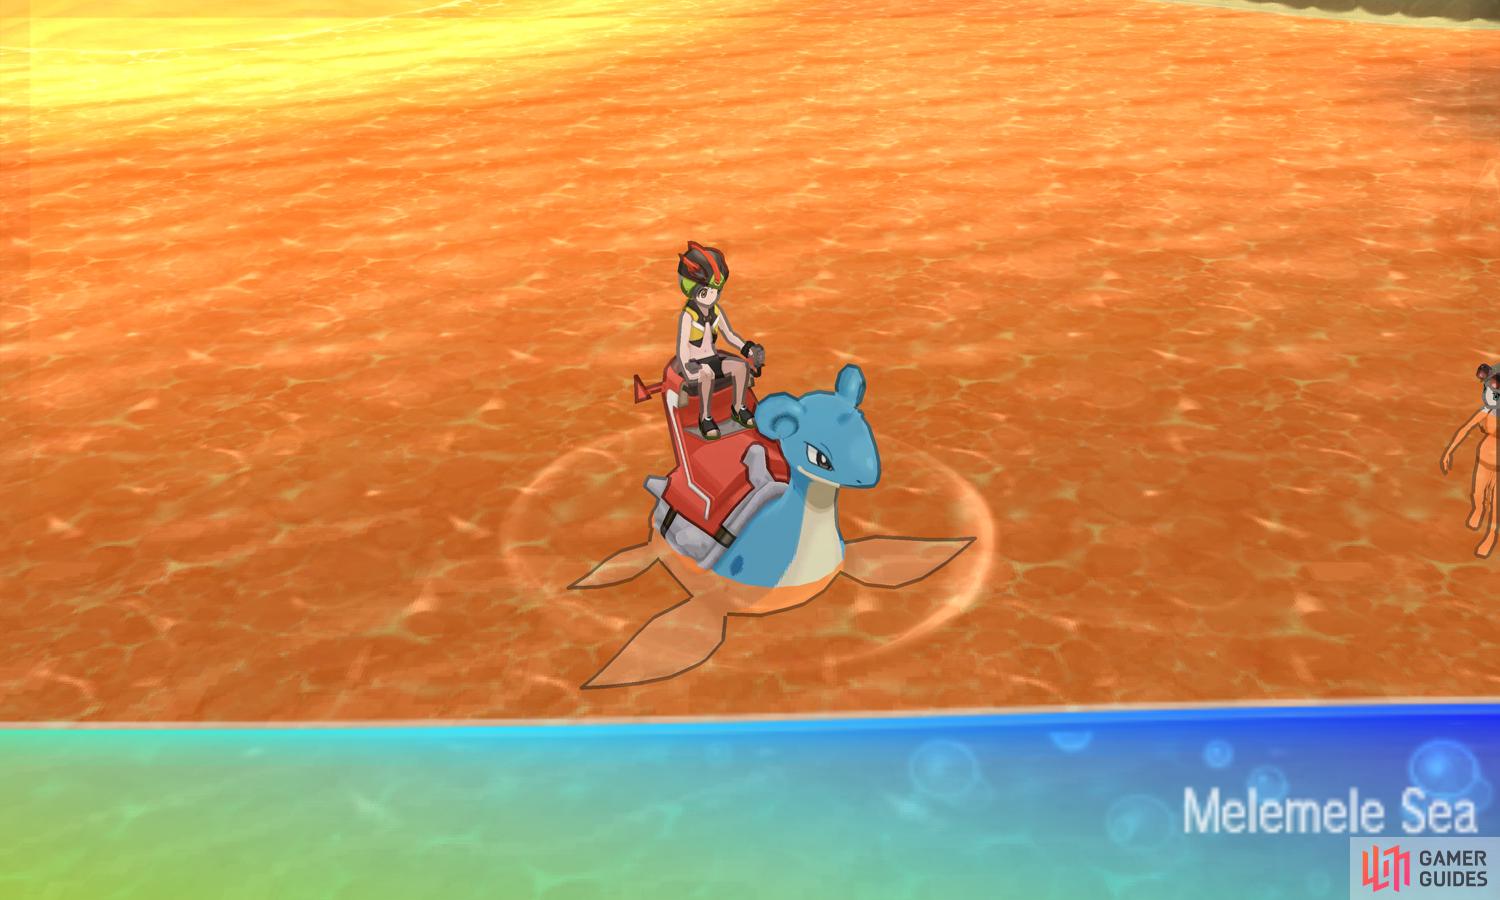 Obviously there's no shortage of Water-type Pokémon in the sea.